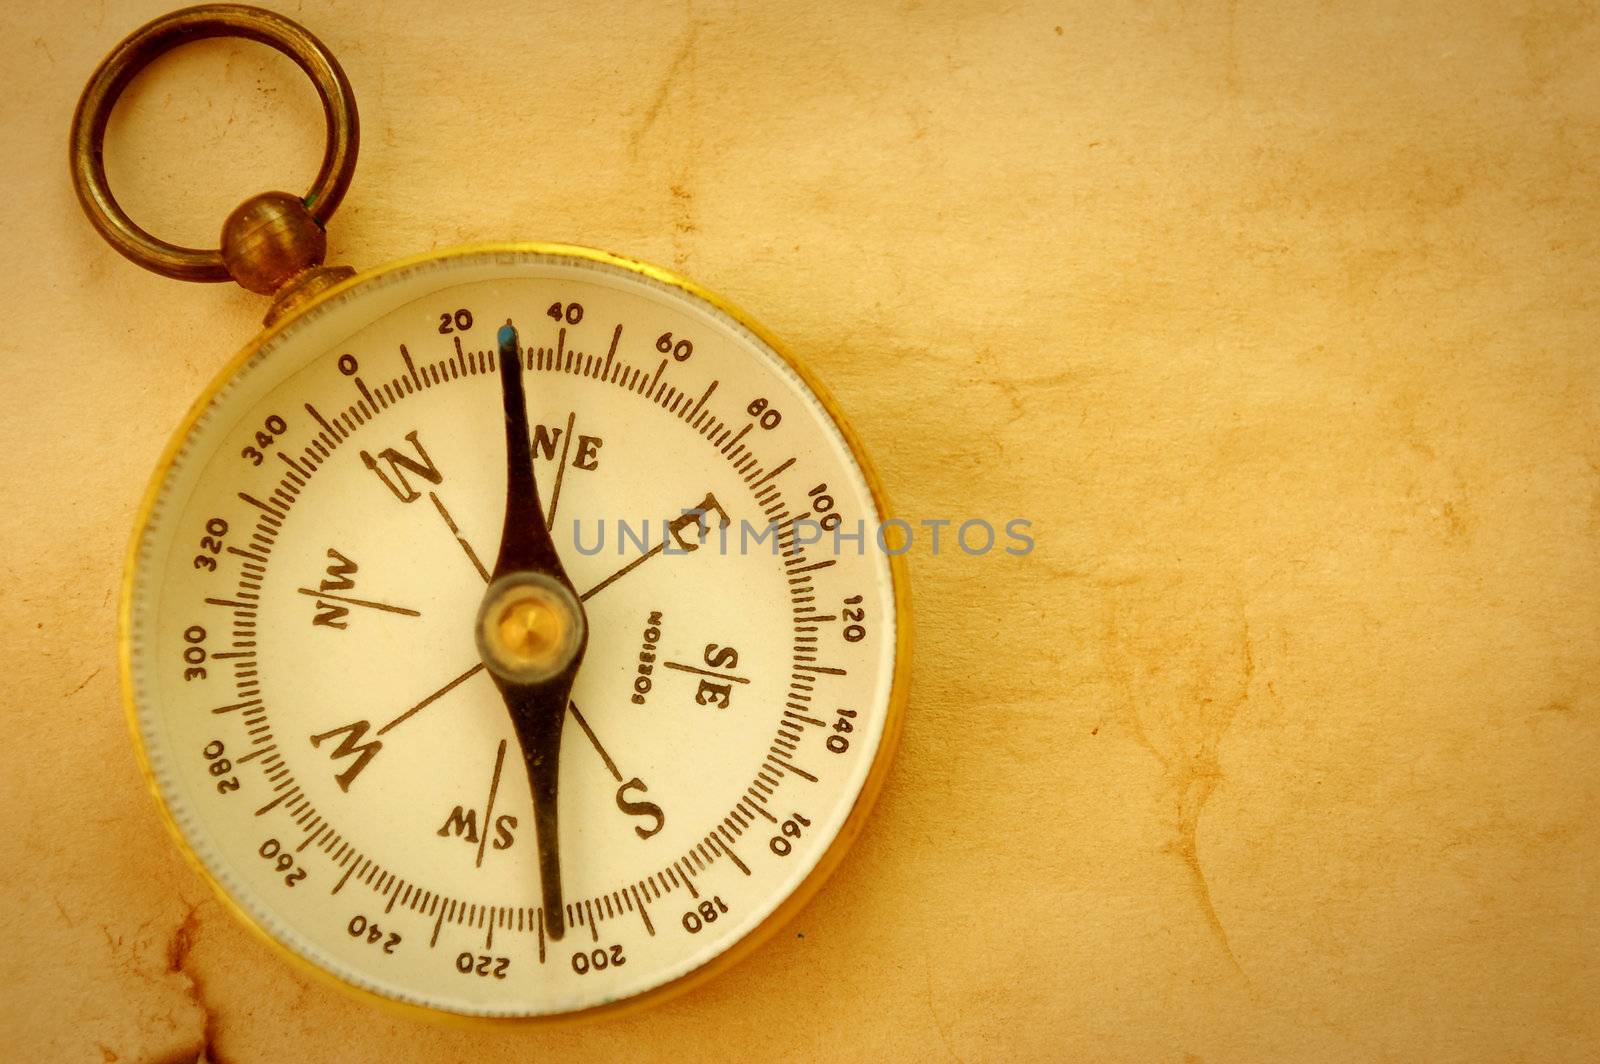 Vintage compass on an old textured paper background